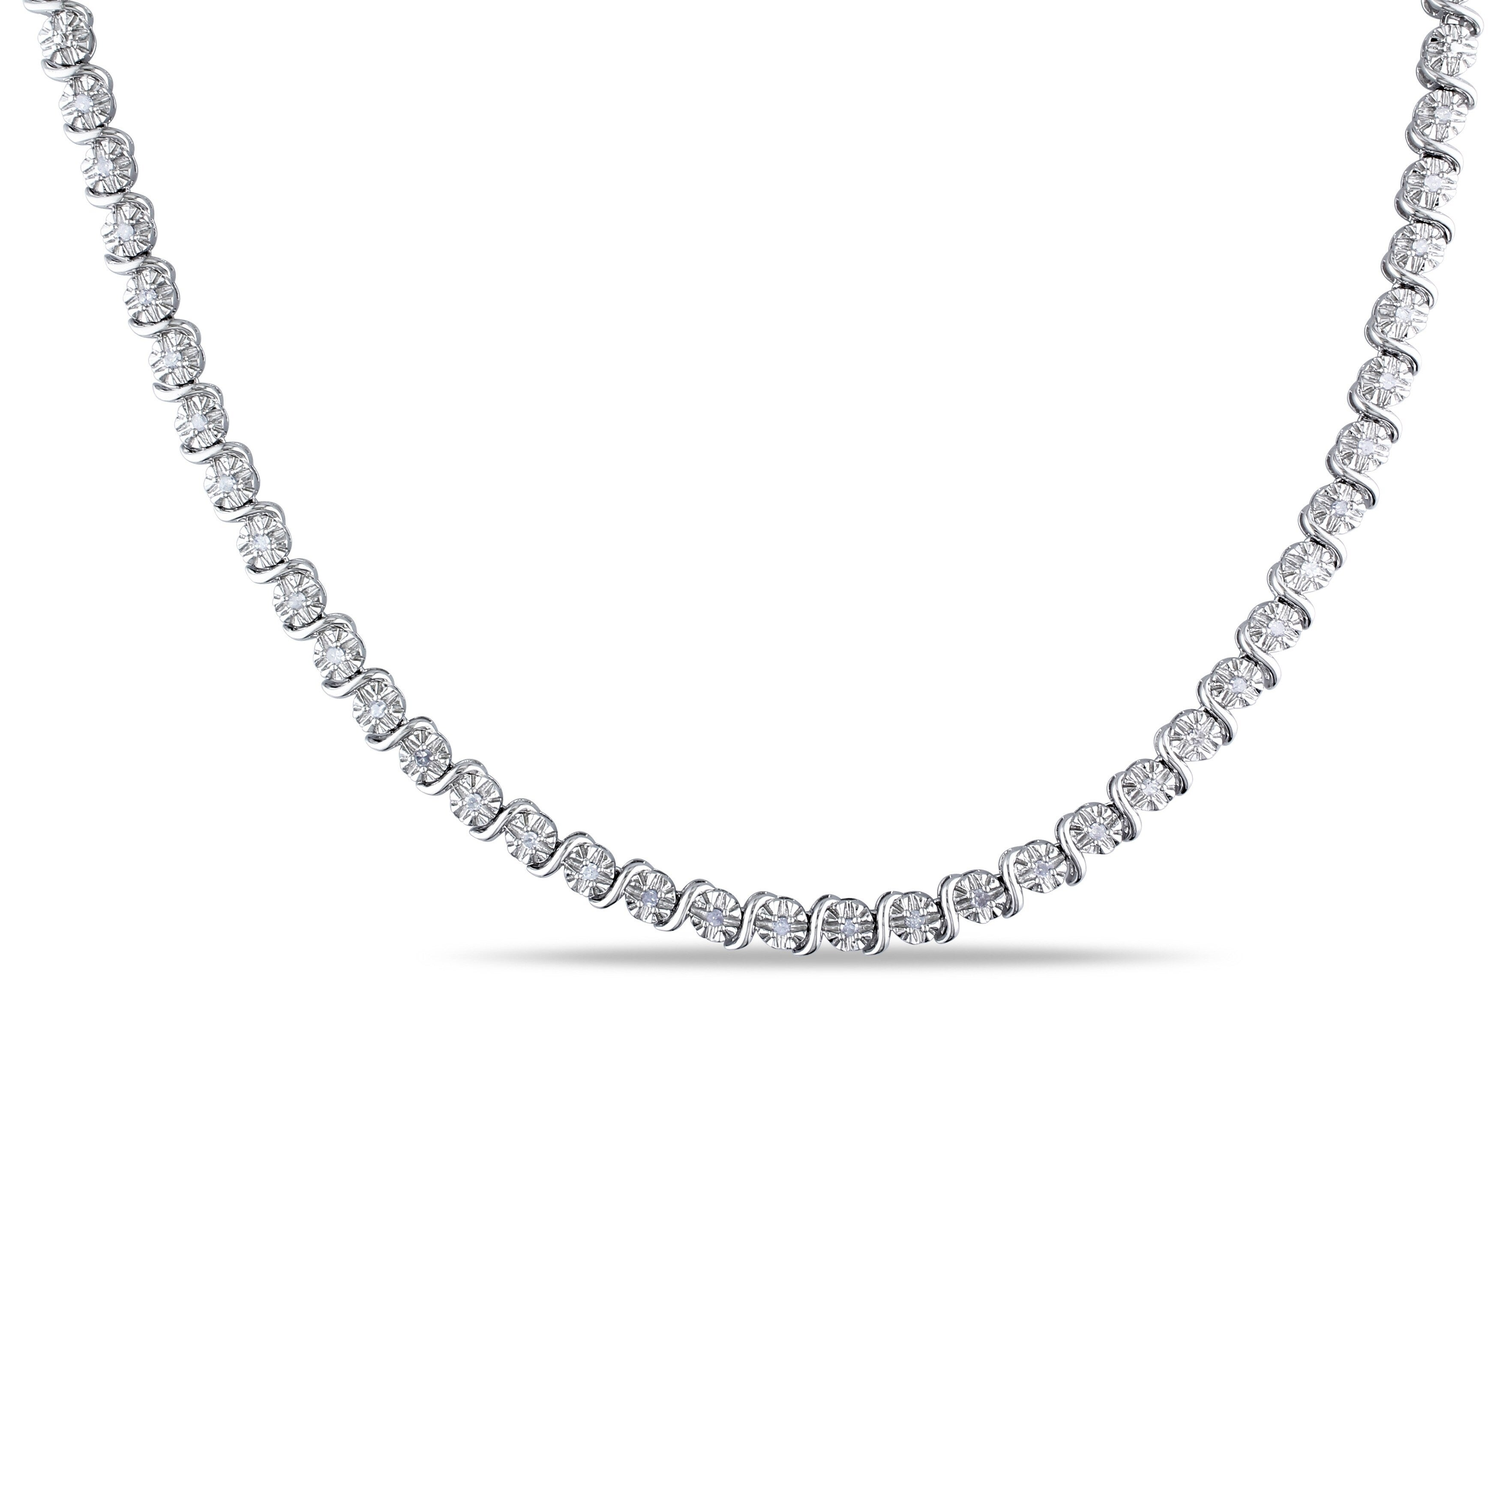 35 Natural White Diamond Sterling Silver Necklace 